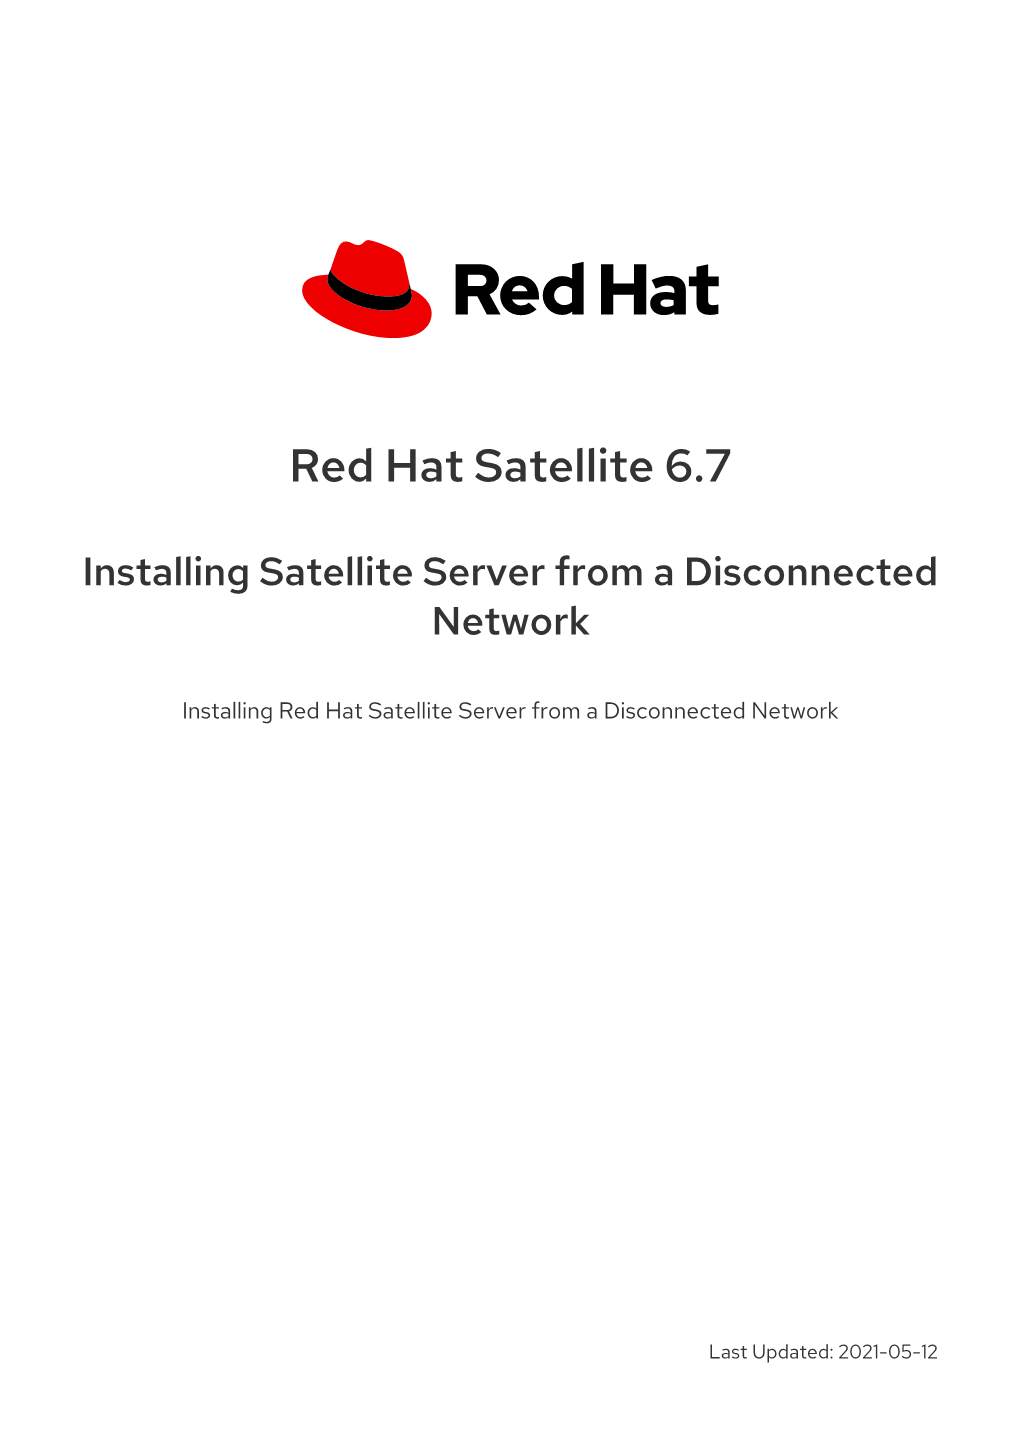 Installing Satellite Server from a Disconnected Network